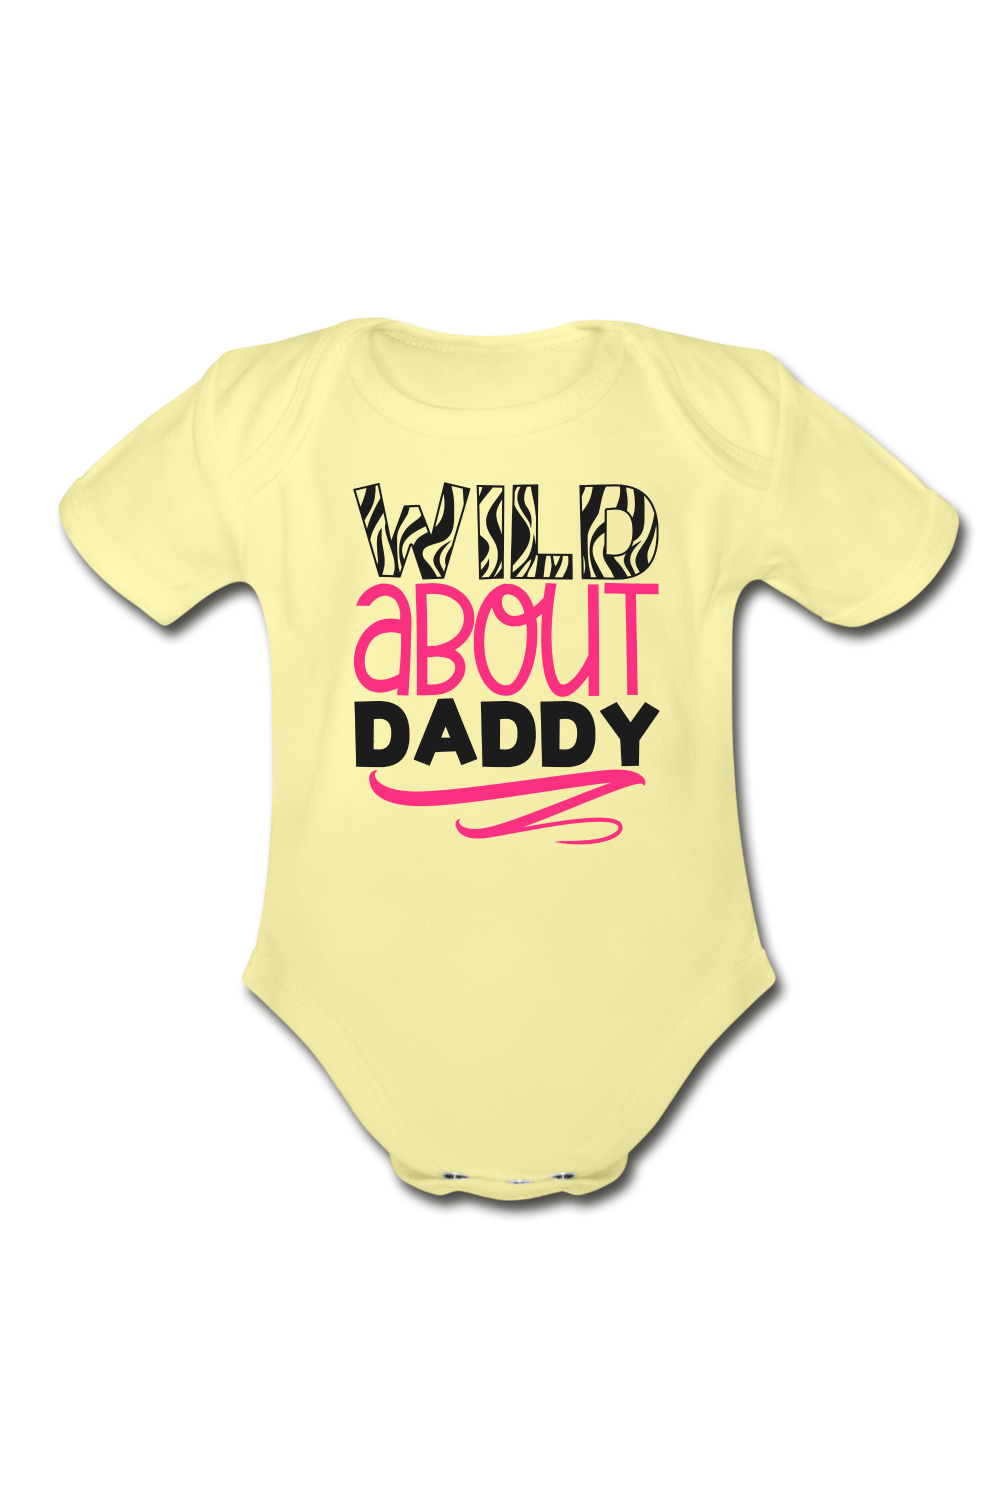 Baby Girl Wild About Daddy Short Sleeve Baby Bodysuit - washed yellow - NicholesGifts.online